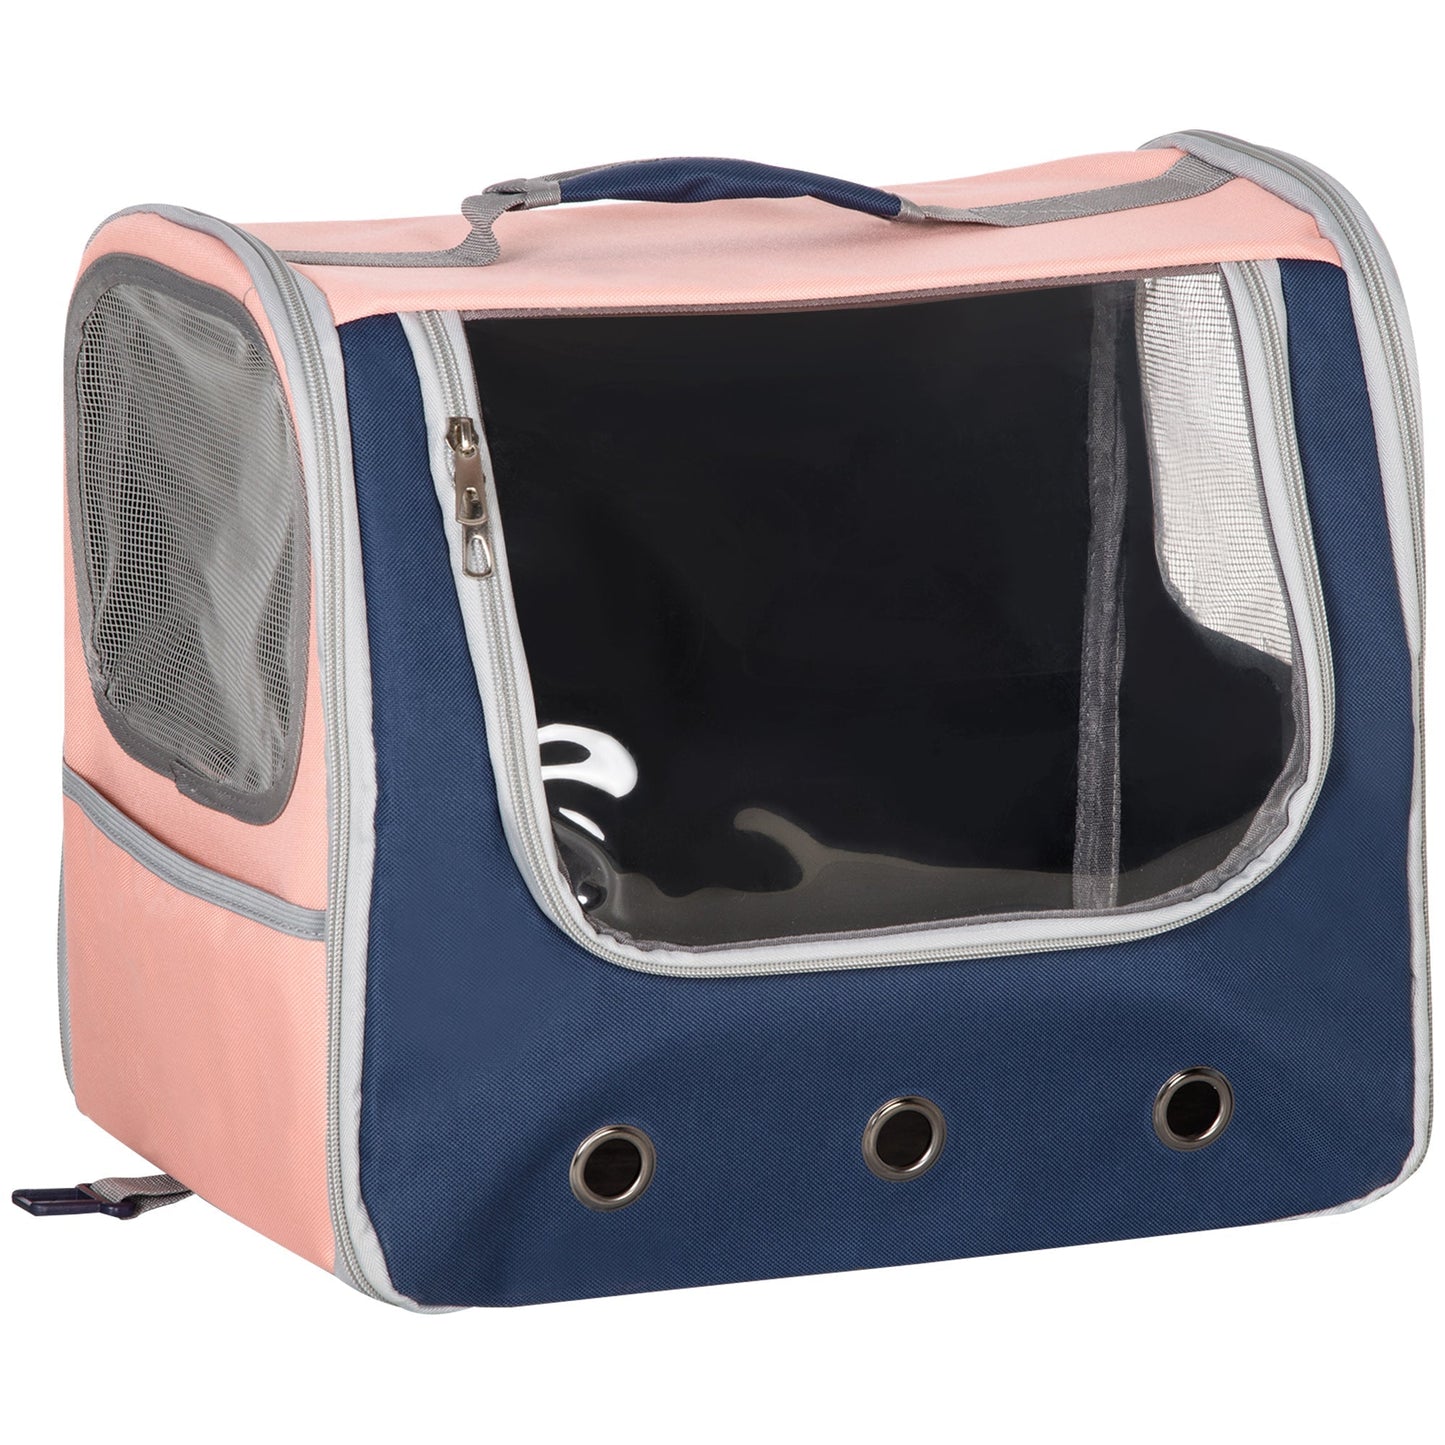 PAWHUT carrier for dogs size XS, dog backpack with 3 -revenue design and network windows, 42x30x36 cm